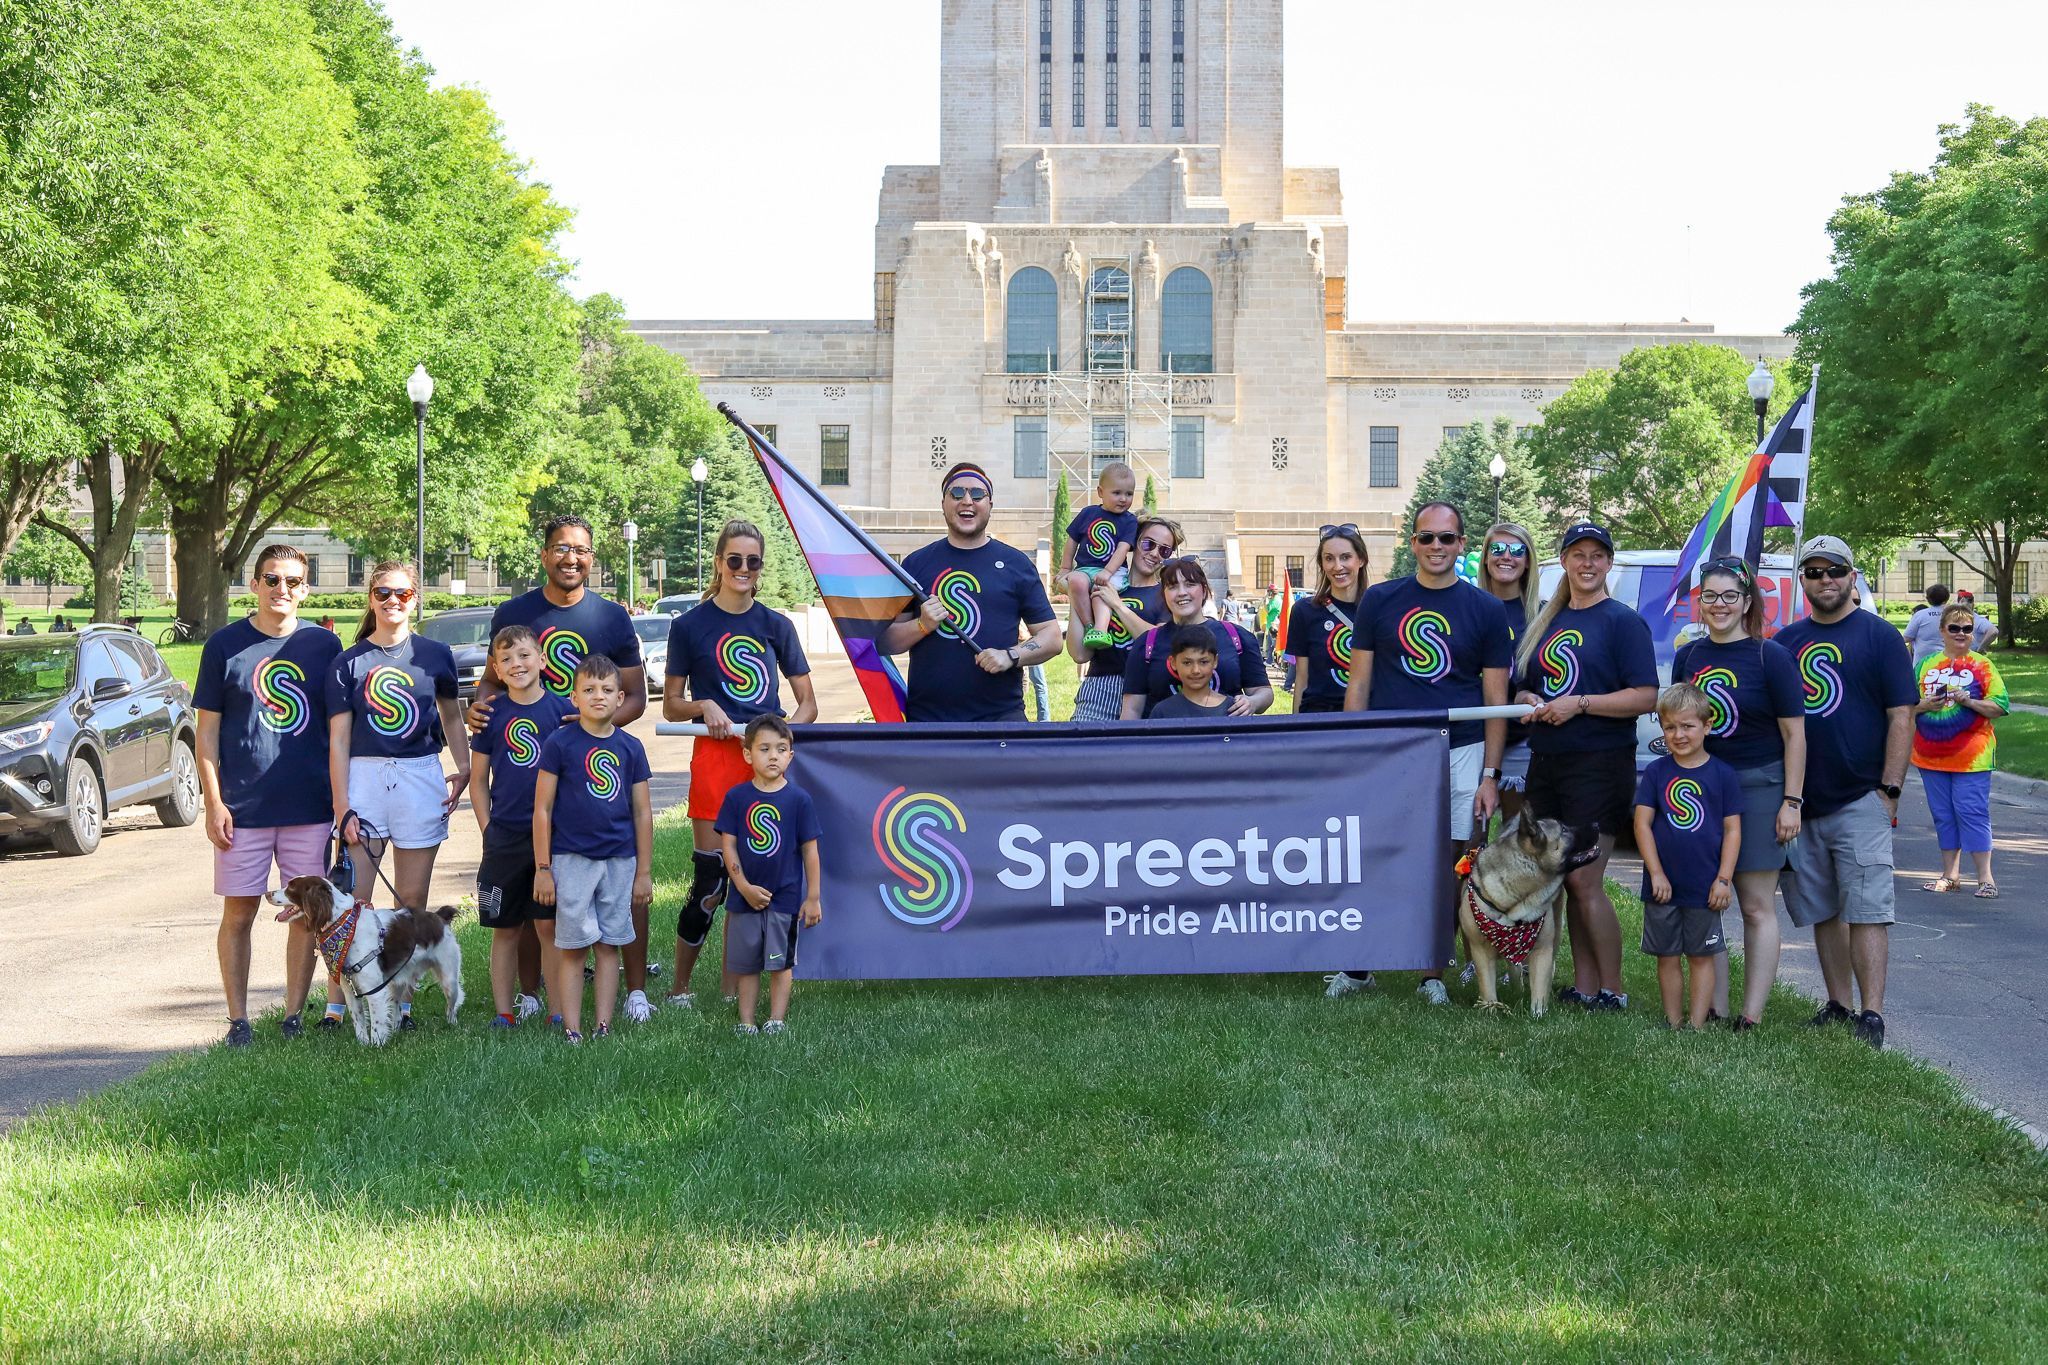 A group of Spreetail employees and their families pose in front of the Nebraska capitol with rainbow flags, rainbow t-shirts, and a banner that reads "Spreetail Pride Alliance."